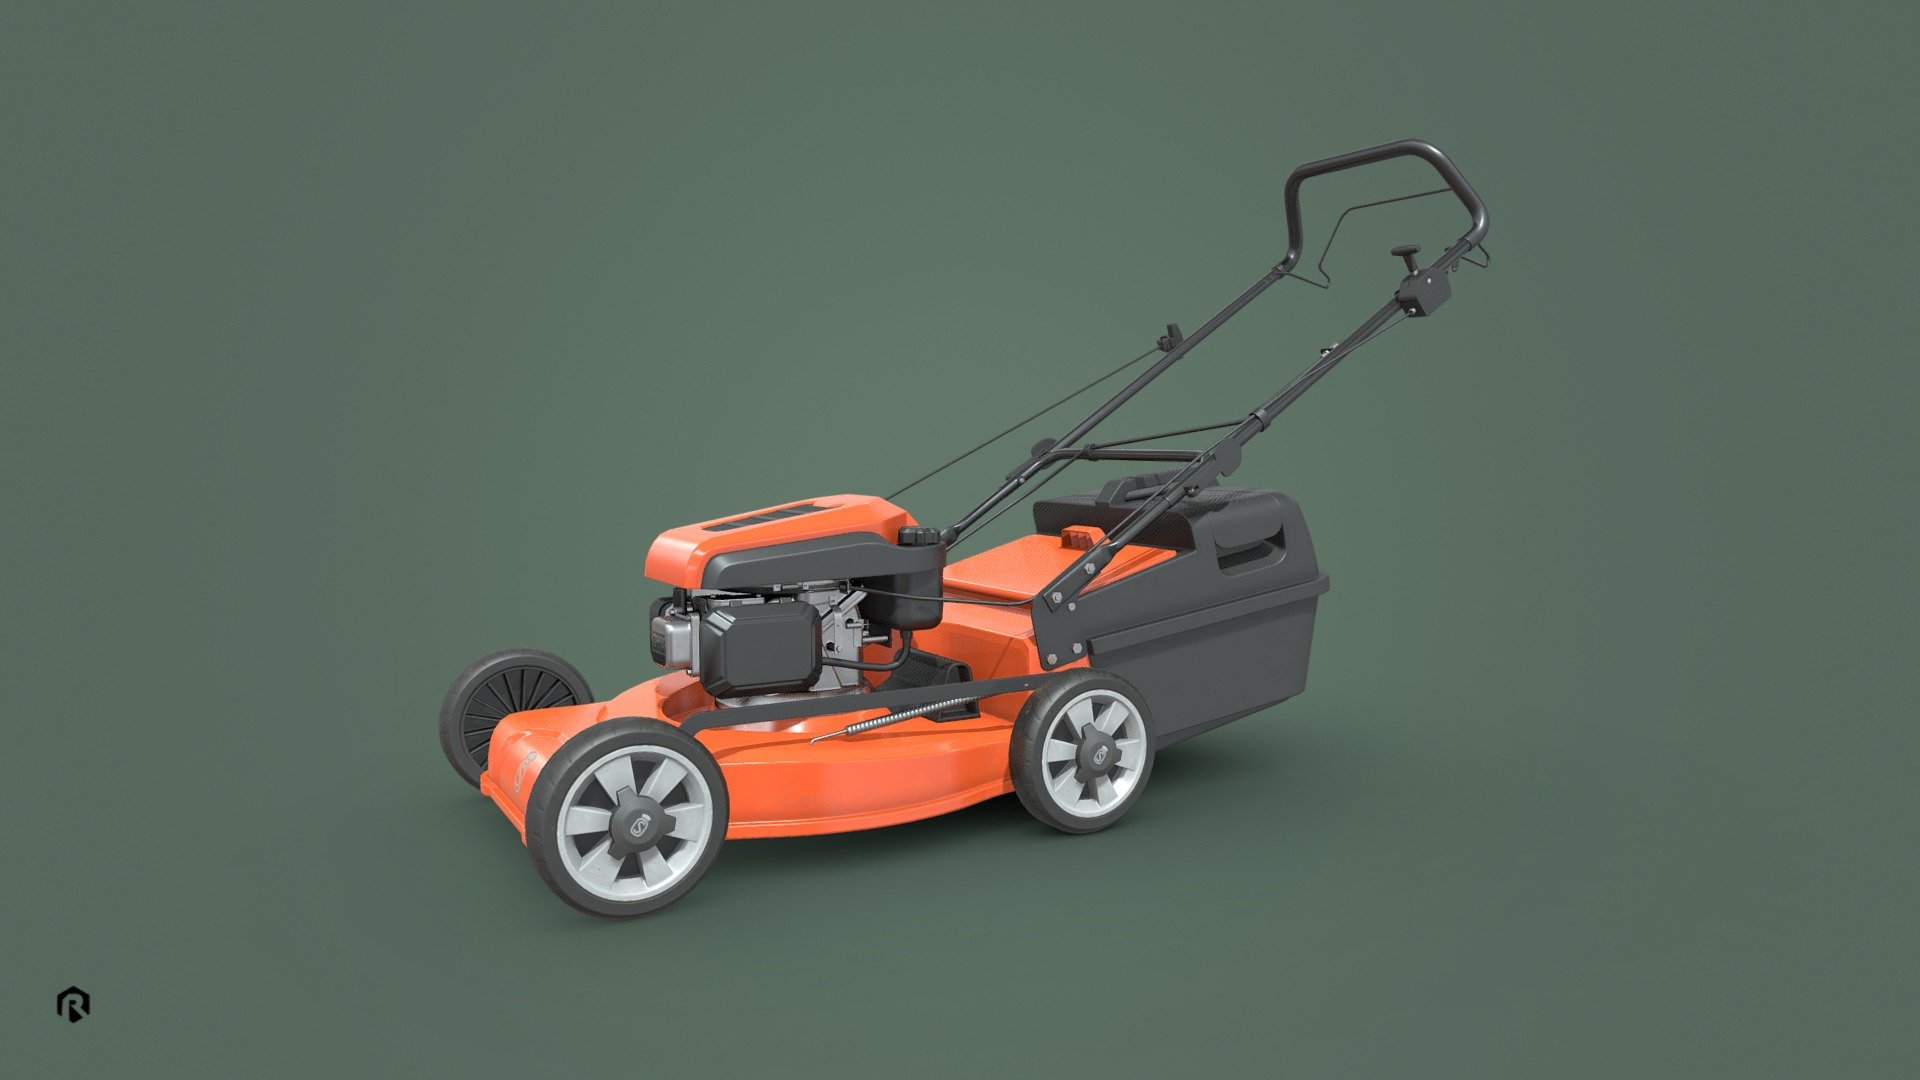 Low-poly PBR 3D model of Lawn Mower.

This 3D model is best for use in games and other VR / AR, real-time applications such as Unity or Unreal Engine. It can also be rendered in Blender (ex Cycles) or Vray as the model is equipped with all required PBR textures.  

Technical details:




1 PBR textures set.

23265 Triangles.

22511  Vertices.

The model is divided into few objects (Main Body, Basket, Knifes, Wheels and few other)

Lot of additional file formats included (Blender, Unity, UE4 Maya etc.)  

More file formats are available in additional zip file on product page.

Please feel free to contact me if you have any questions or need any support for this asset.

Support e-mail: support@rescue3d.com - Lawn Mower - Buy Royalty Free 3D model by Rescue3D Assets (@rescue3d) 3d model